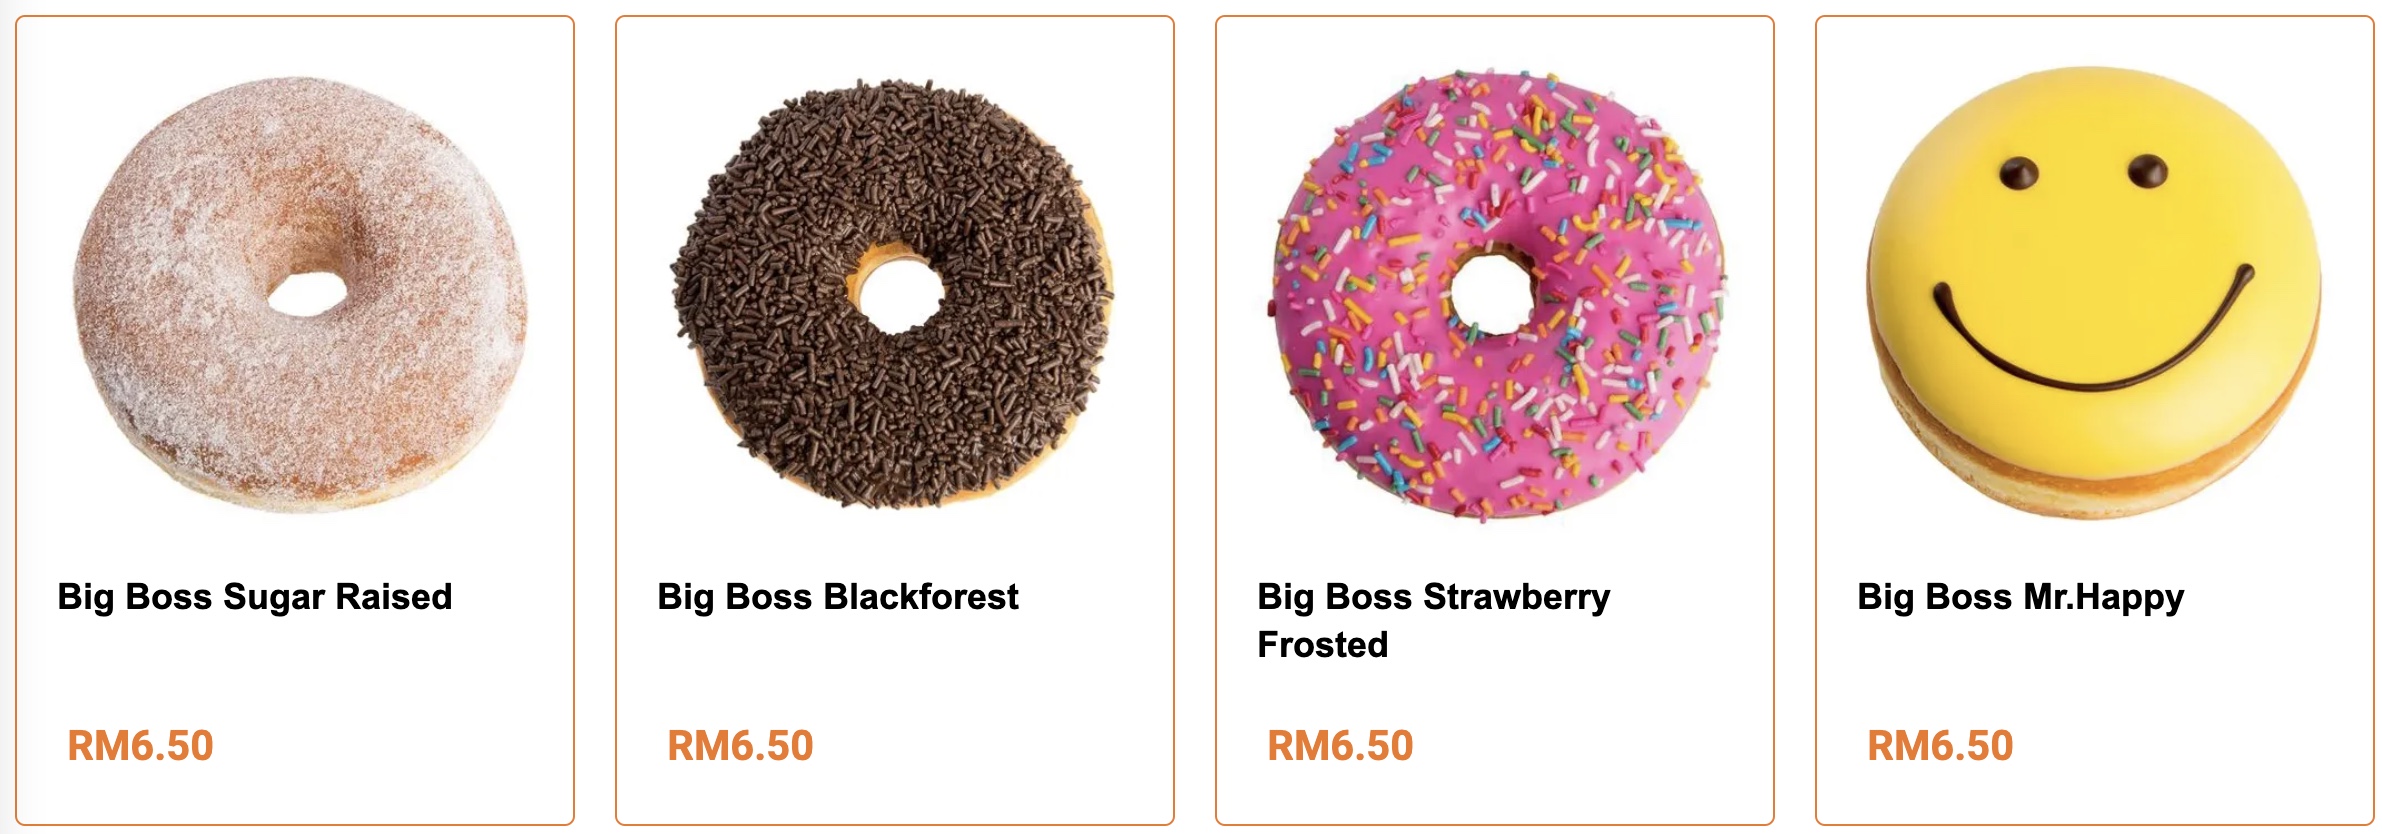 Special Donuts Dunkin Donuts Malaysia